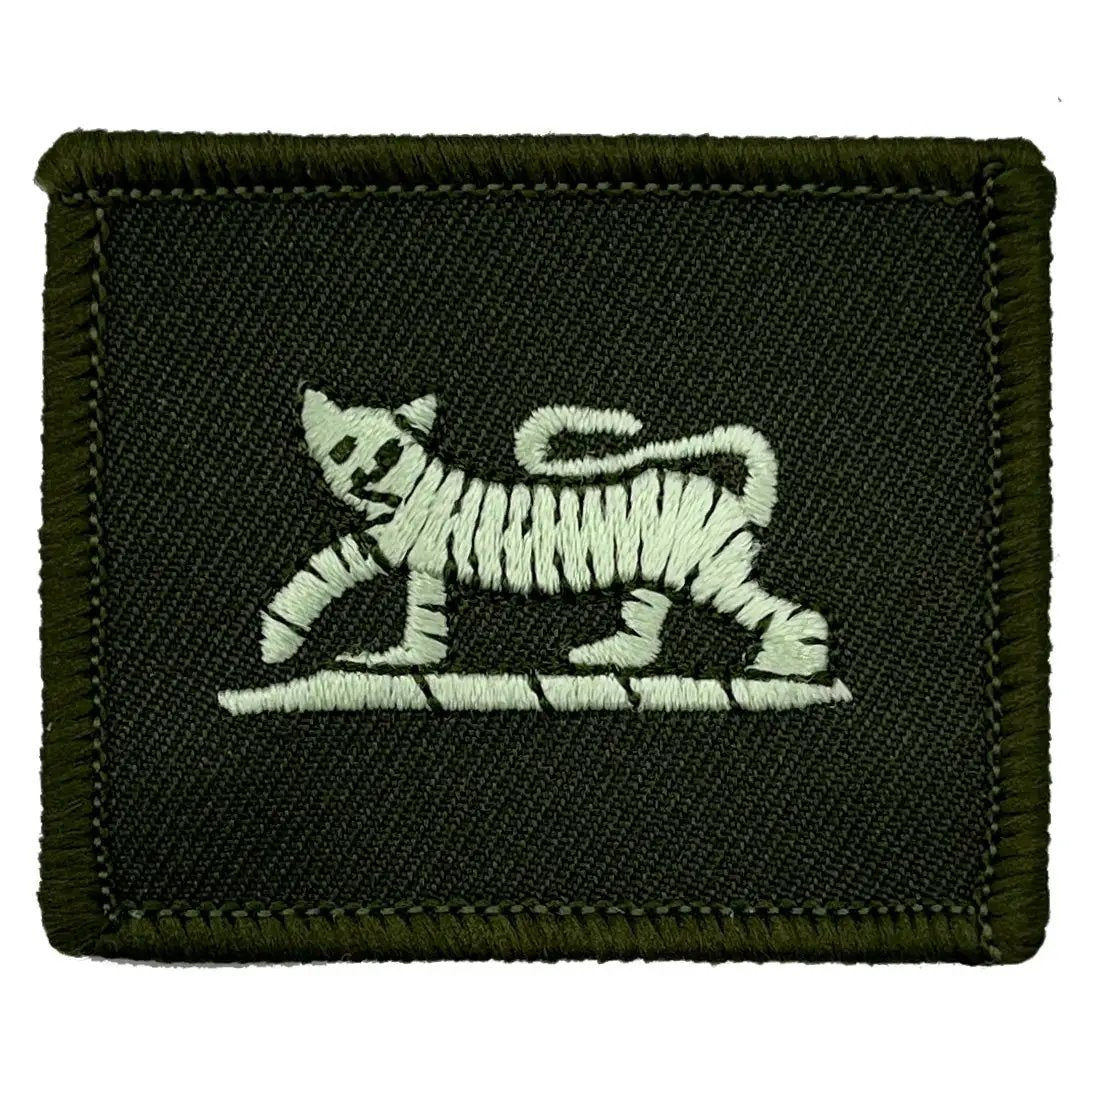 Princess of Wales' Royal Regiment Tiger TRF - Iron or Sewn On Patch - John Bull Clothing